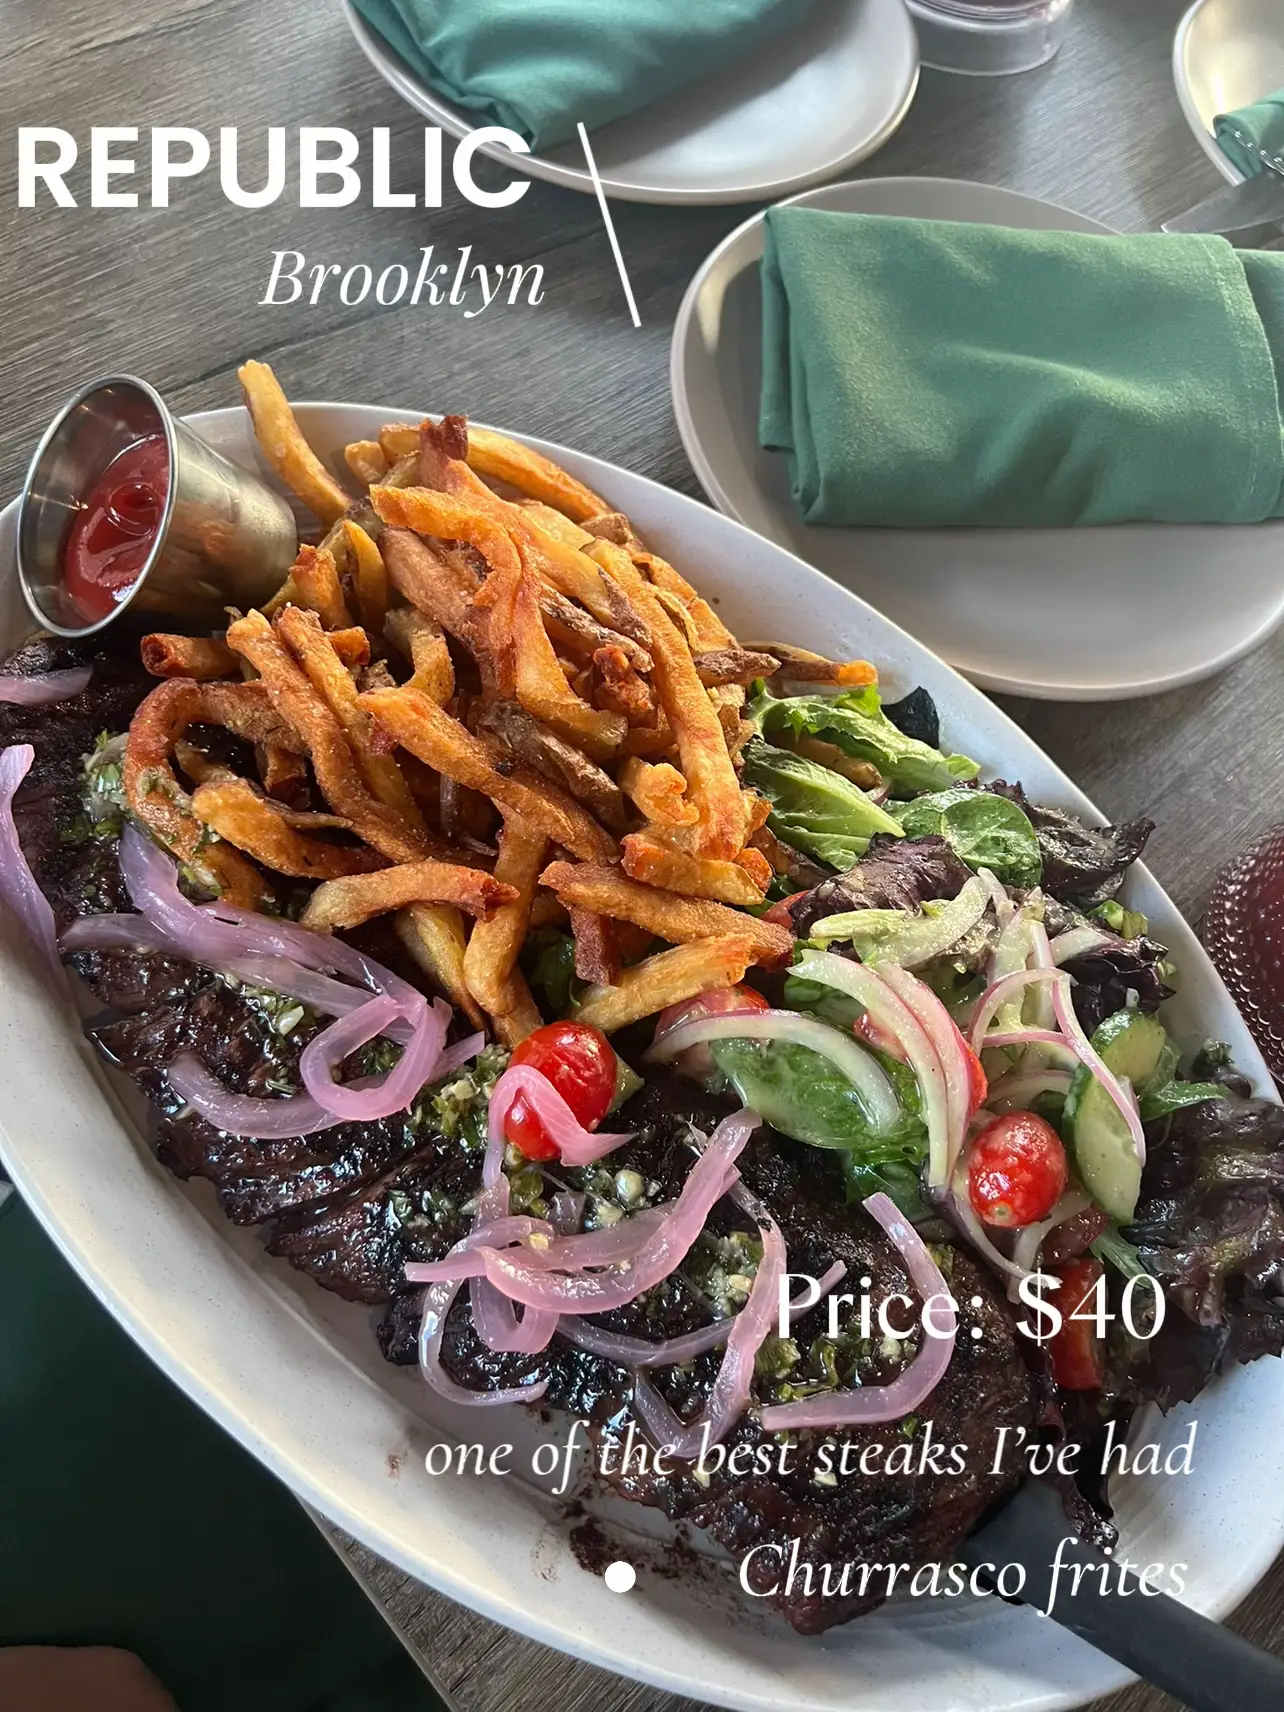  A plate of food with the words "republic brooklyn" on it.